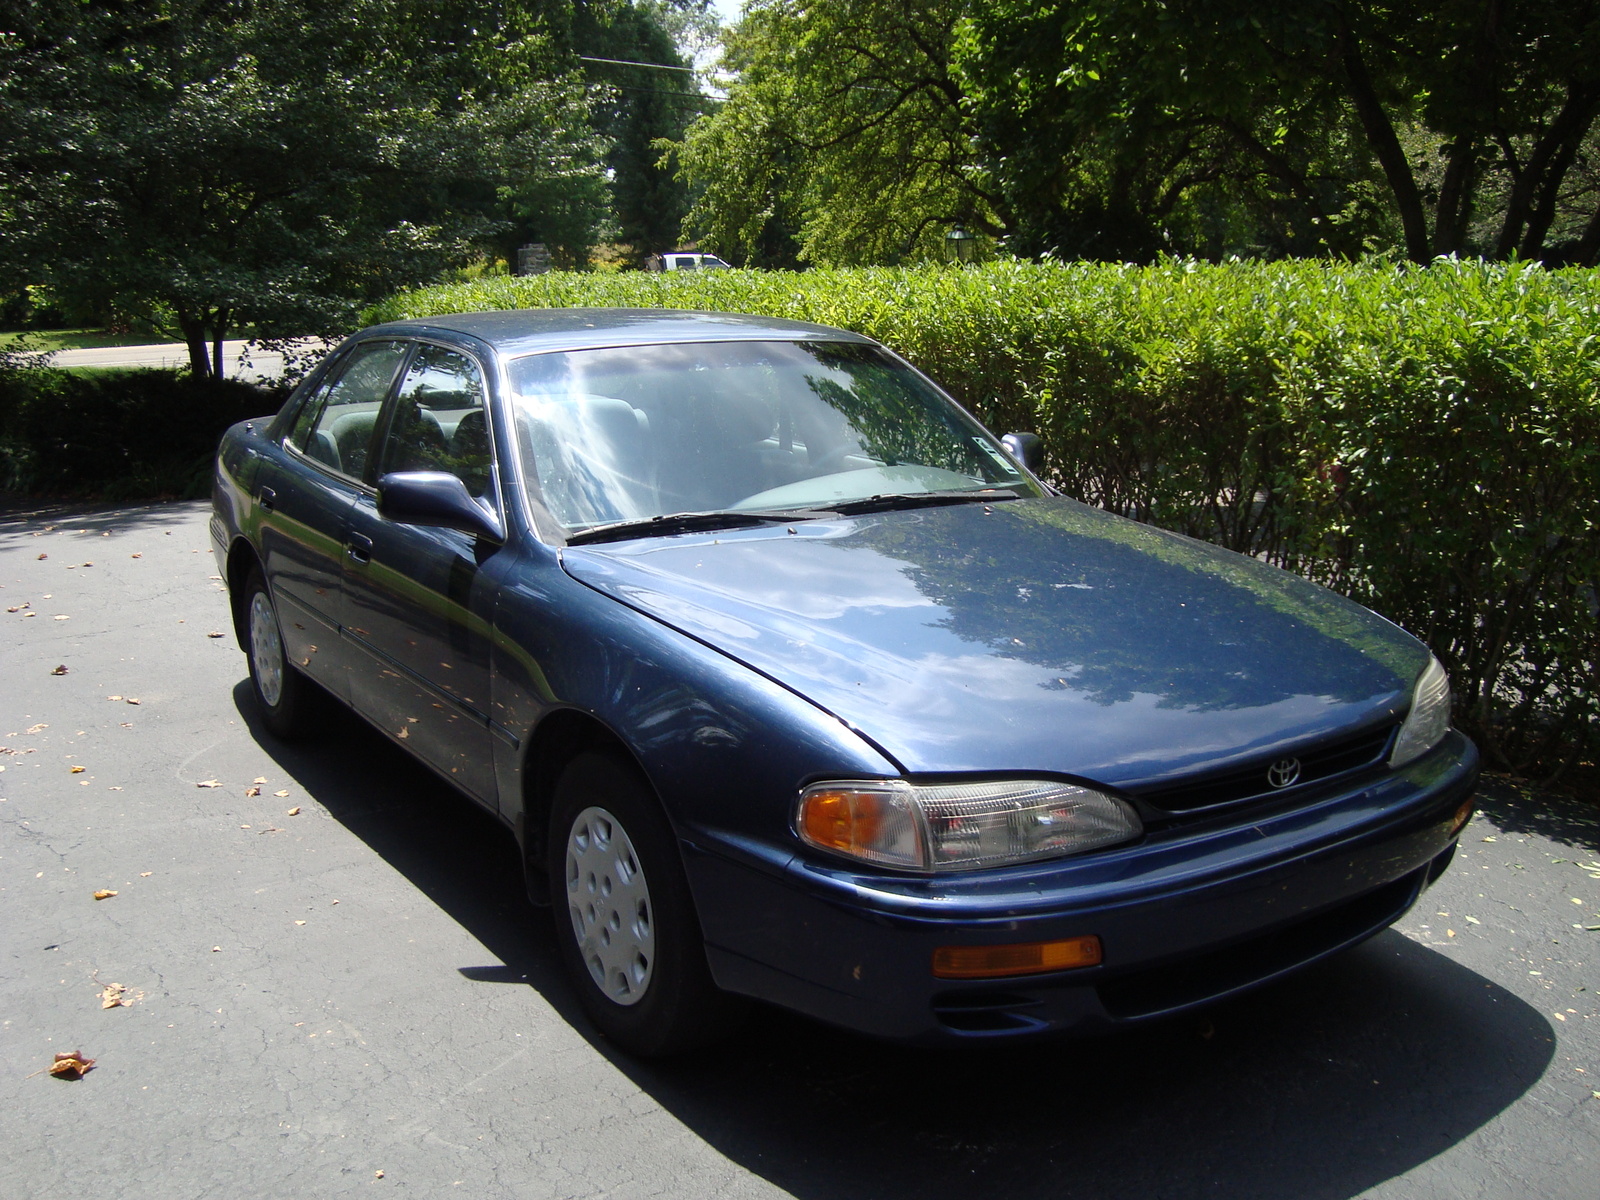 2001 toyota camry collectors edition specs #4